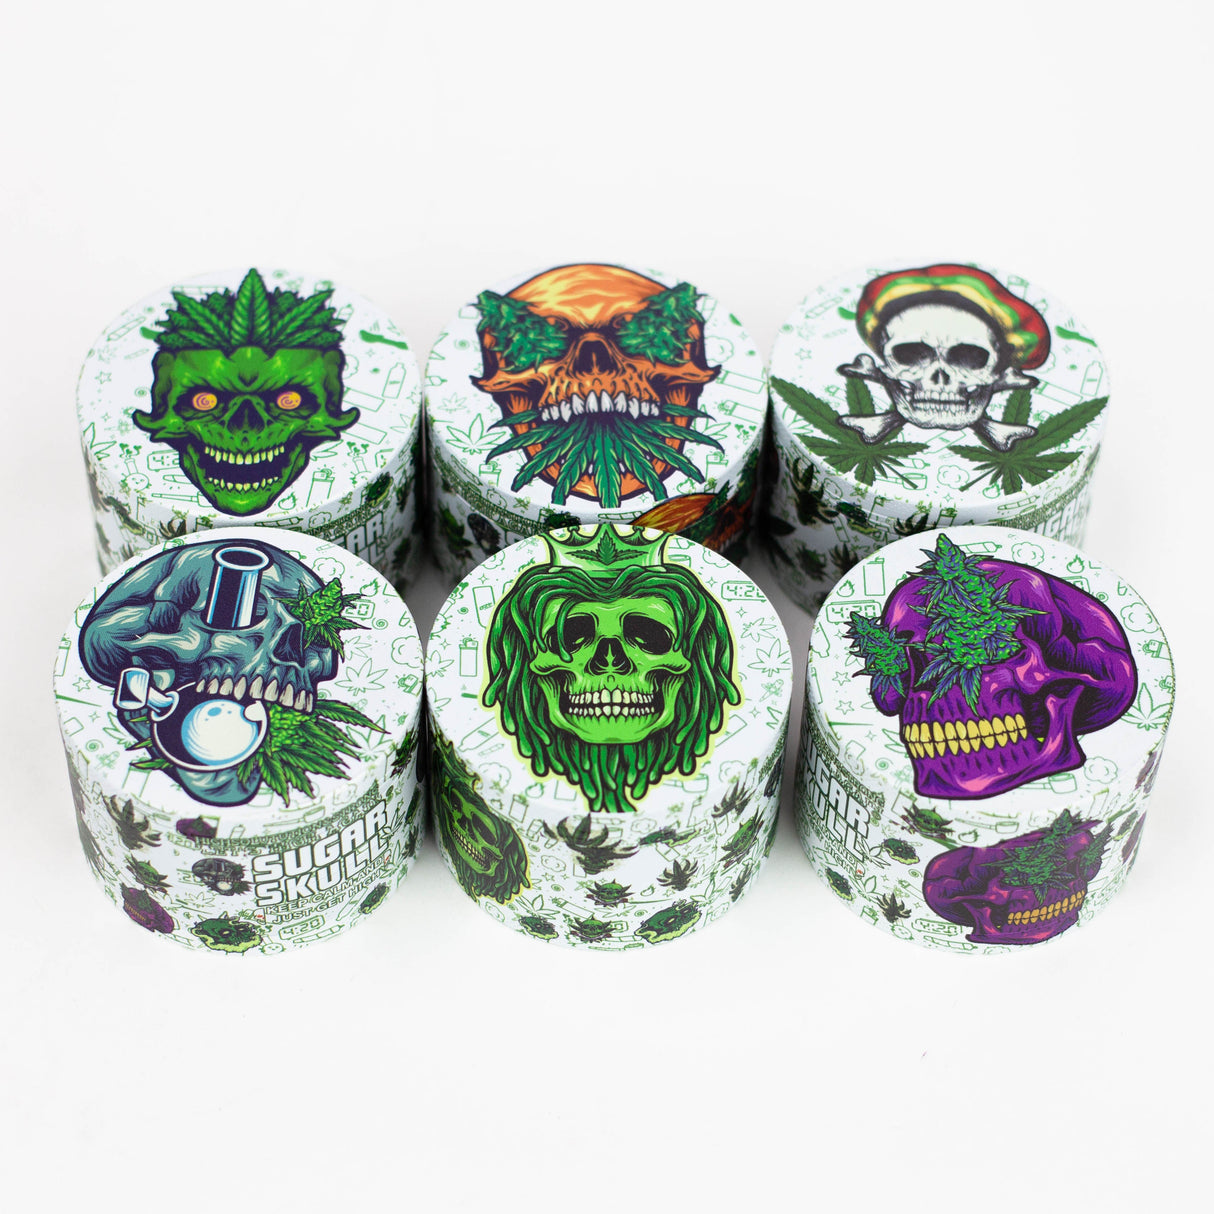 2.5" Metal Grinder 4 Layers with New Sugar Skull Design Box of 6 [GZ302]